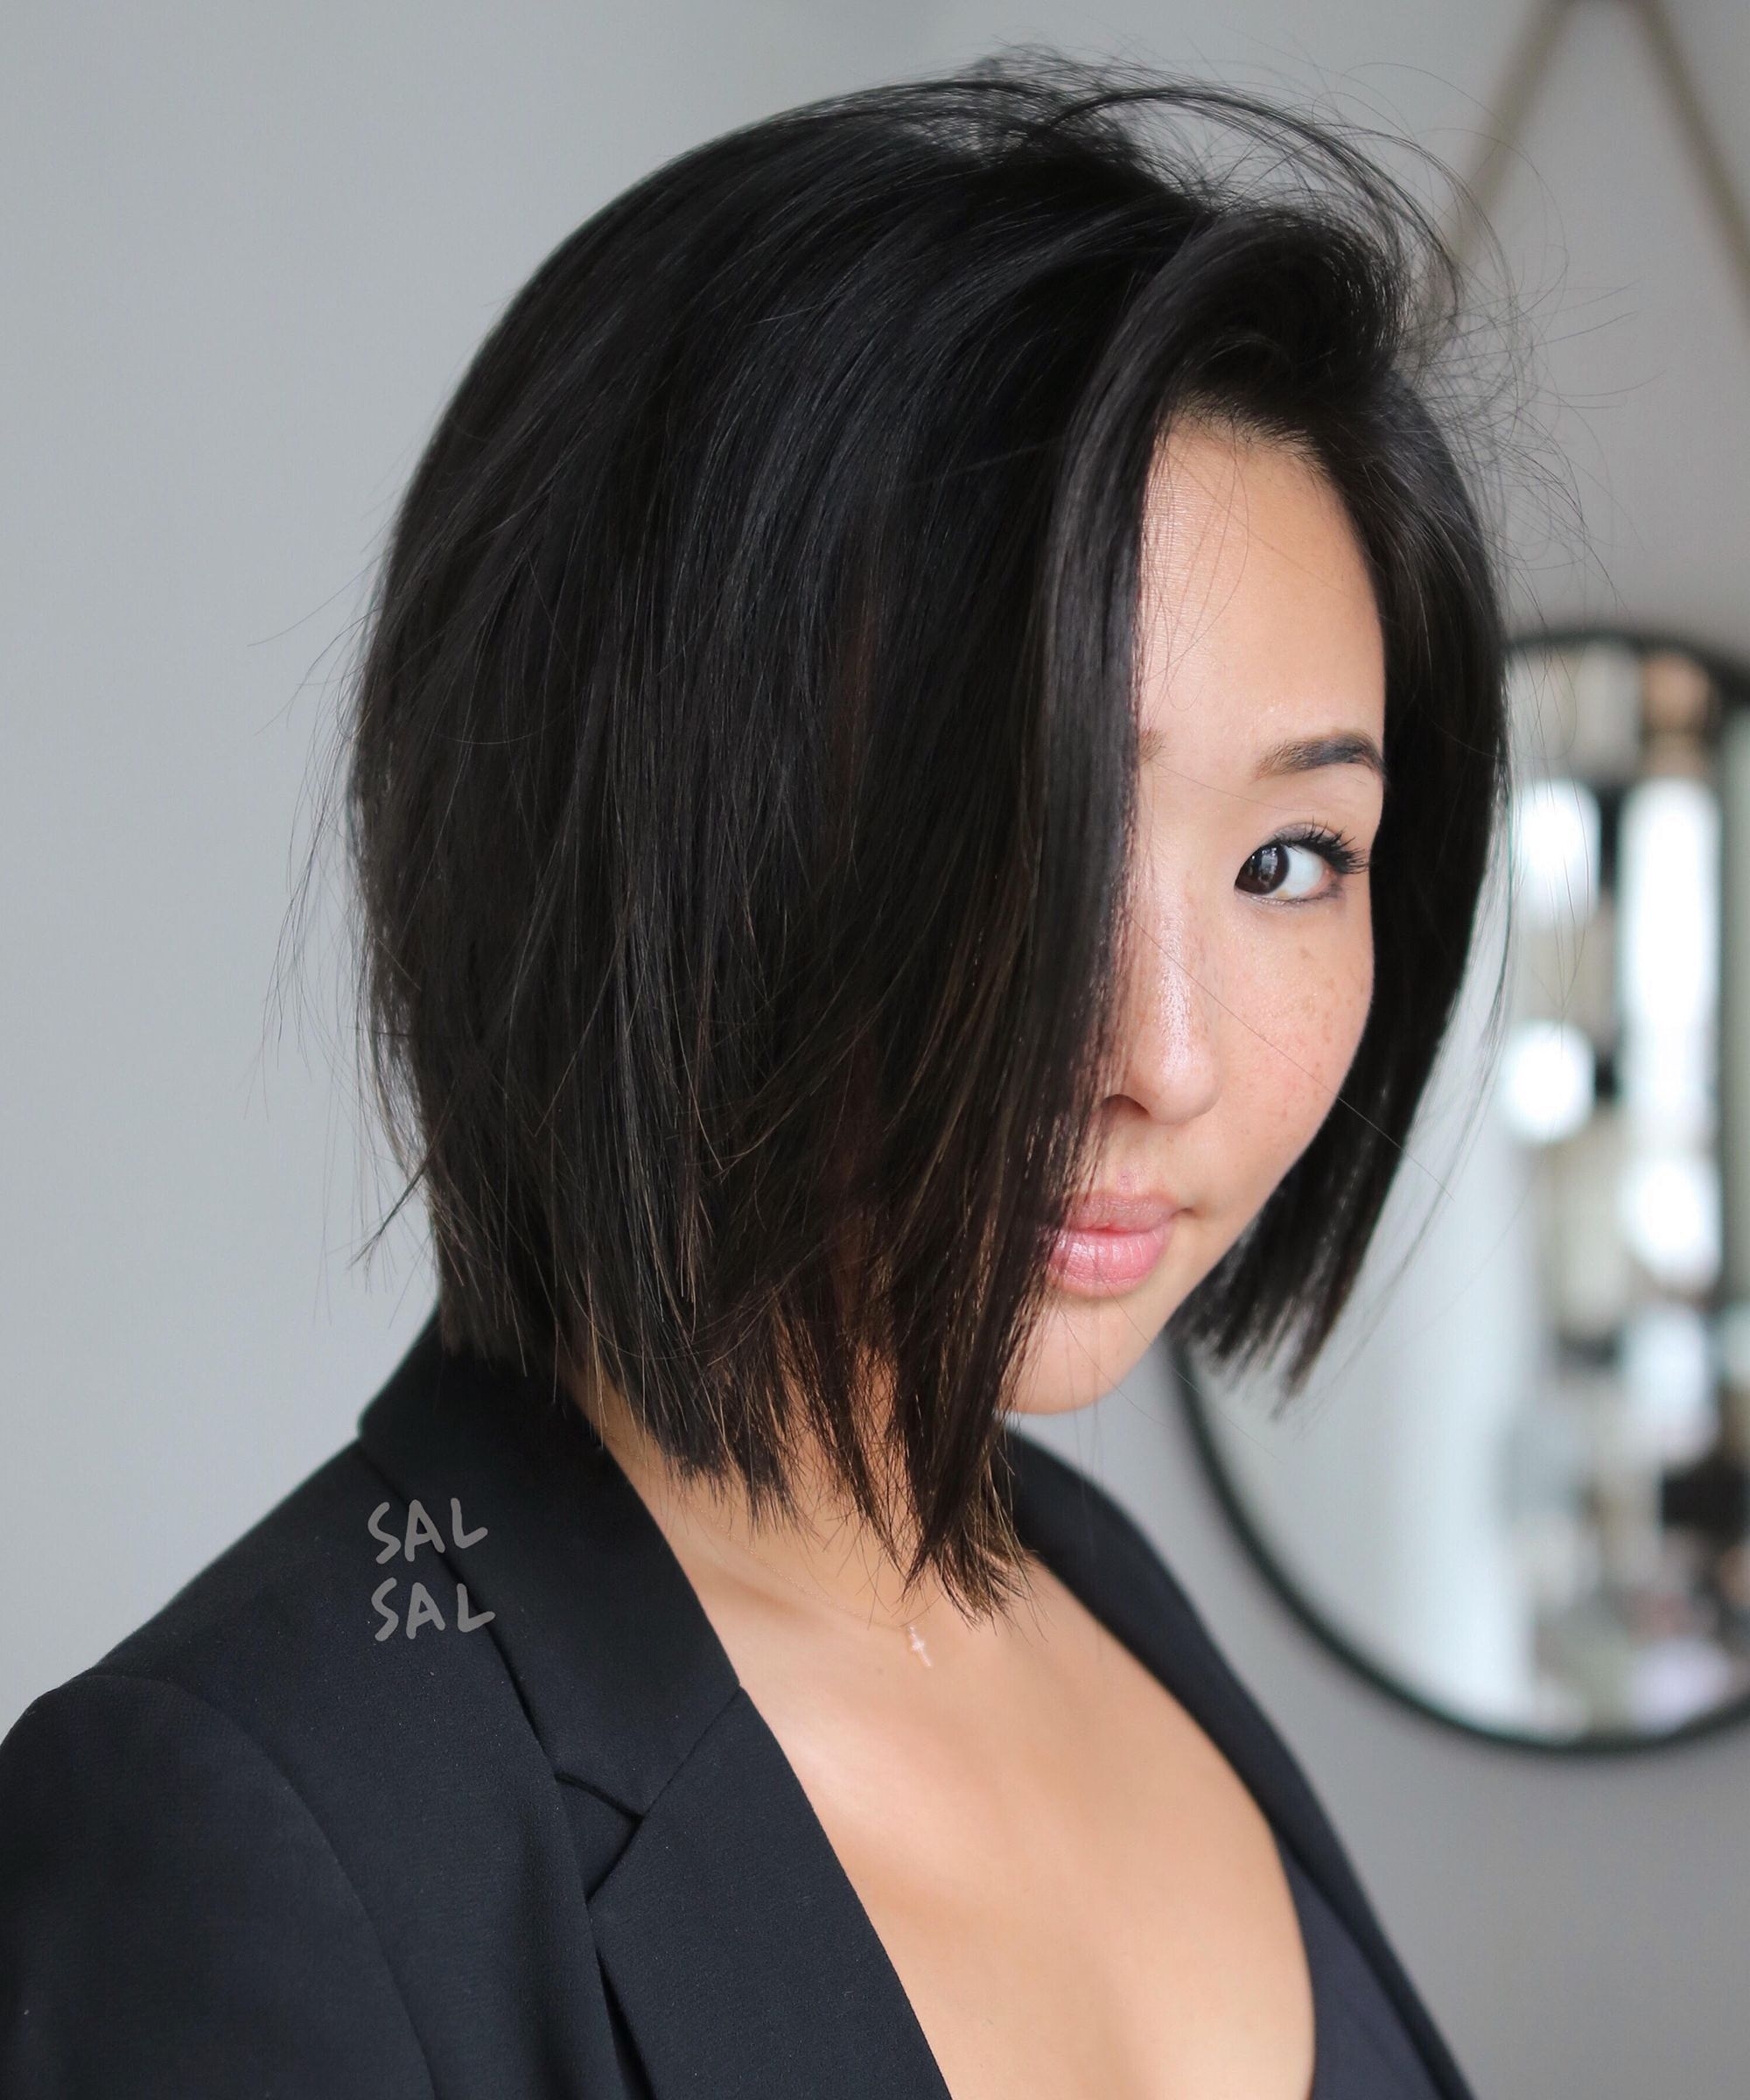 The 2018 Hair Trends We&amp;#039;re Taking Straight Into The New Year In 2019 with Asian Bob Hairstyles 2018